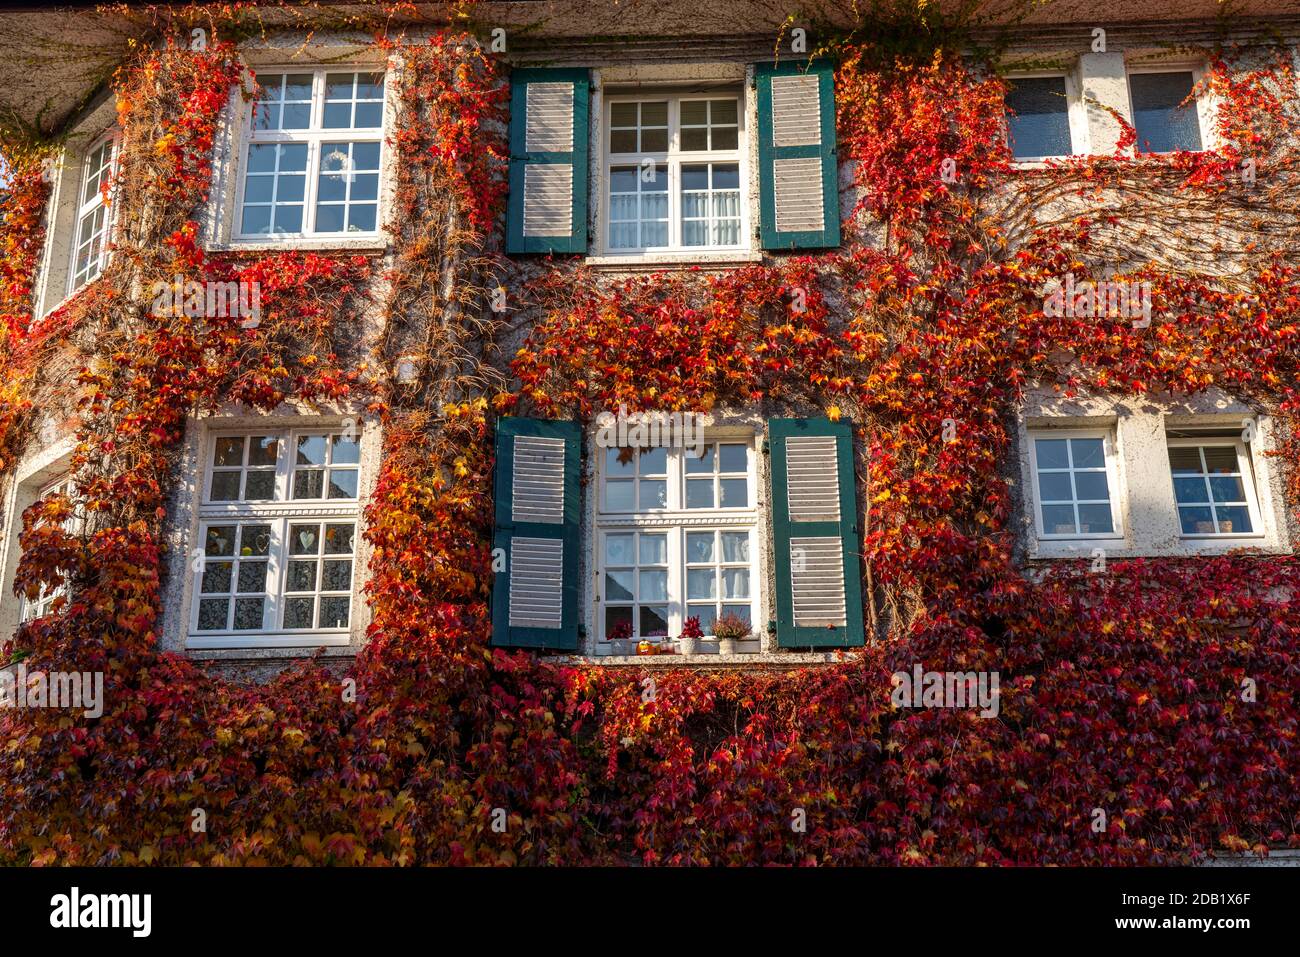 Ivy facades in settlement Margarethenhöhe, in autumn, listed garden city settlement, built from 1906 to 1938, Essen, Germany Stock Photo